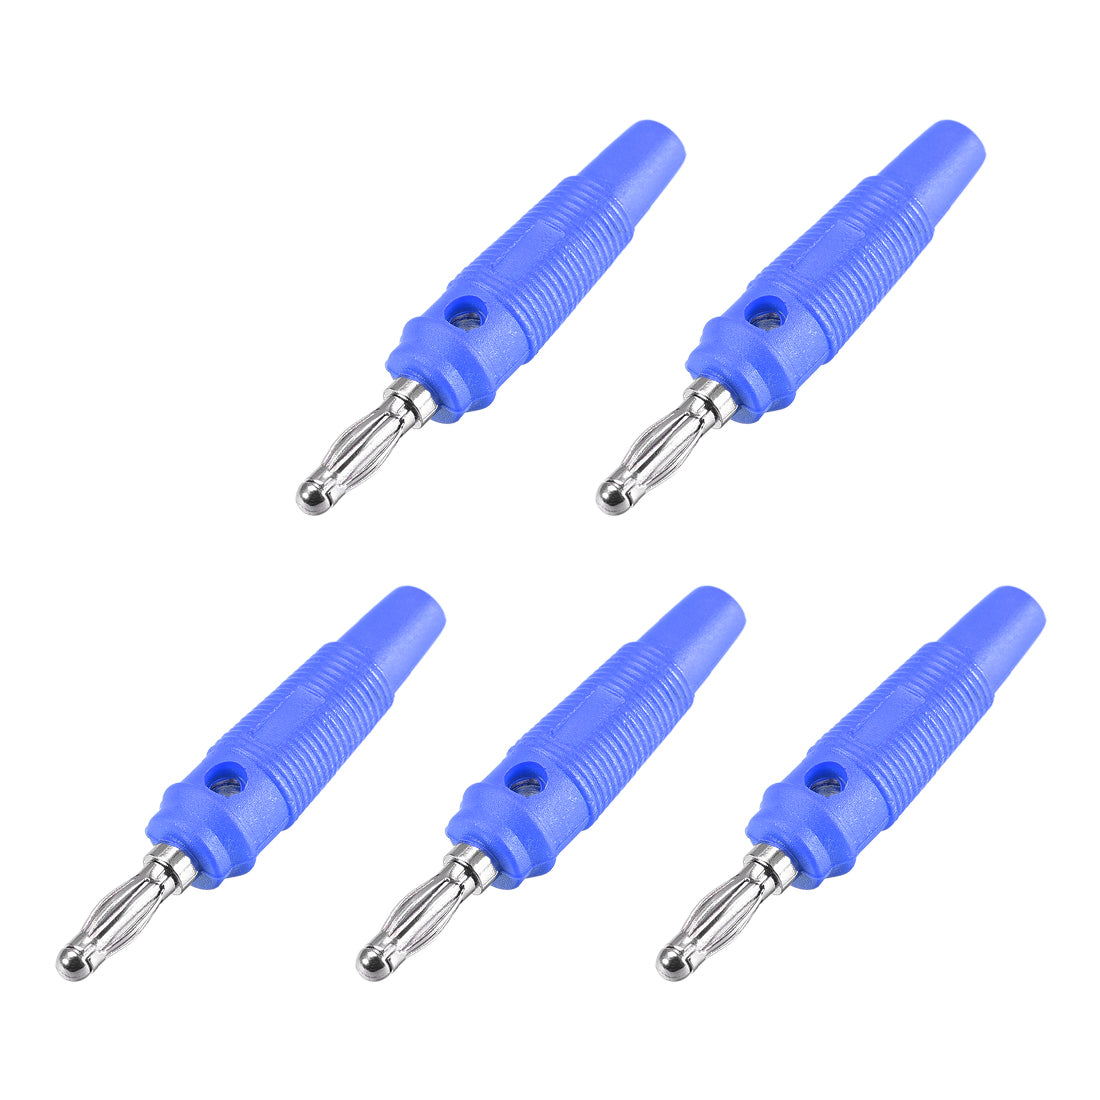 uxcell Uxcell 4mm Banana Speaker Plug Screws Cable Plugs Connectors Blue 10A Jack Connector 5pcs